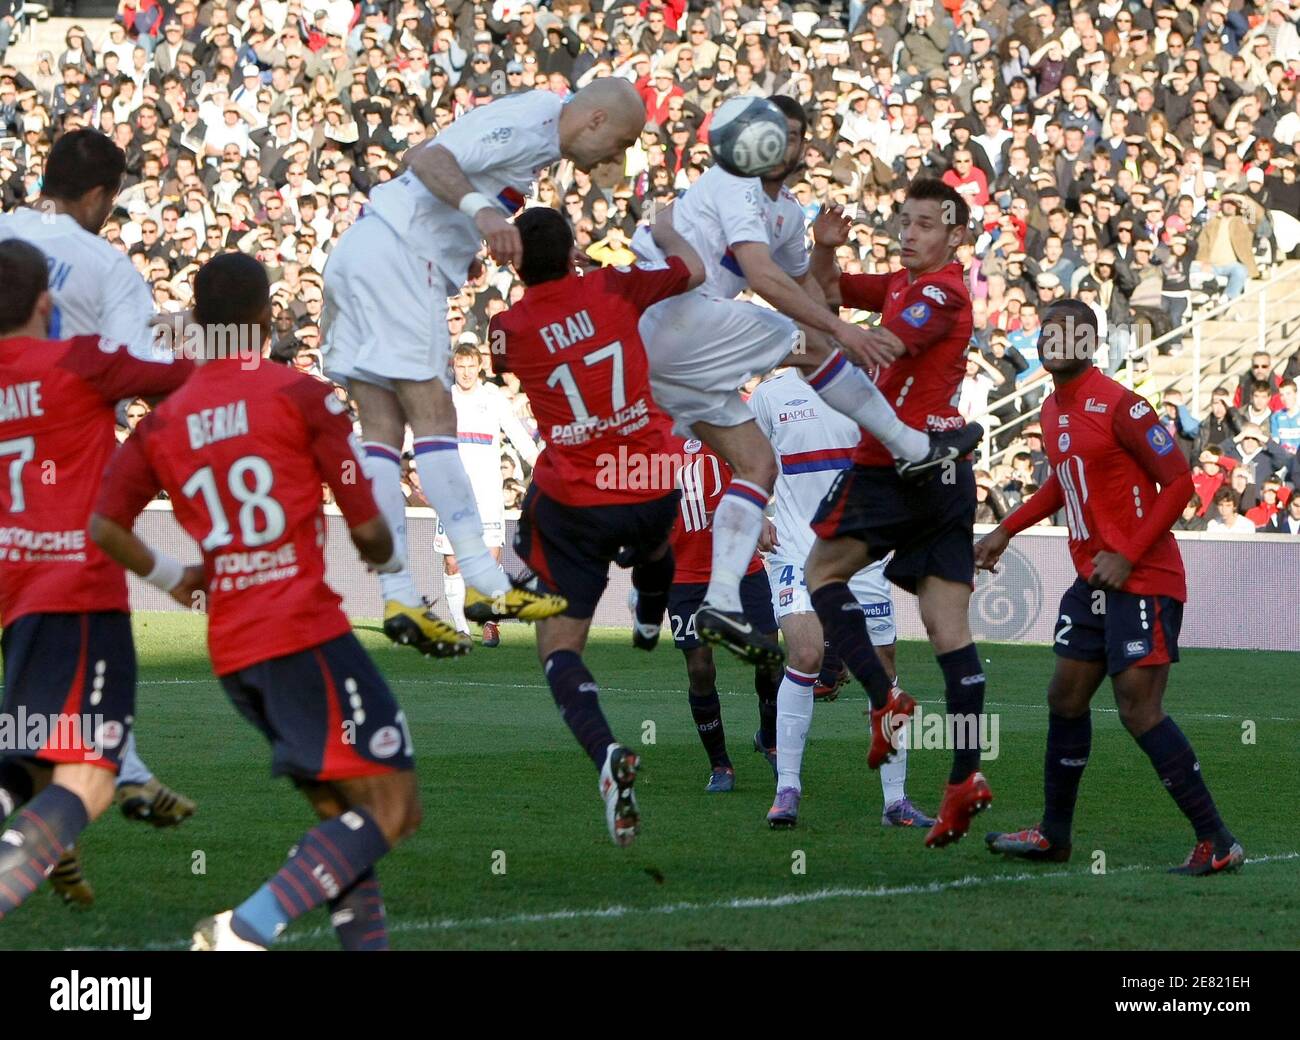 Olympique Lyon's Cris (wearing yellow boots) heads the ball to score  against Lille during their French Ligue 1 soccer match at the Gerland  stadium in Lyon, April 11, 2010. REUTERS/Robert Pratta (FRANCE -